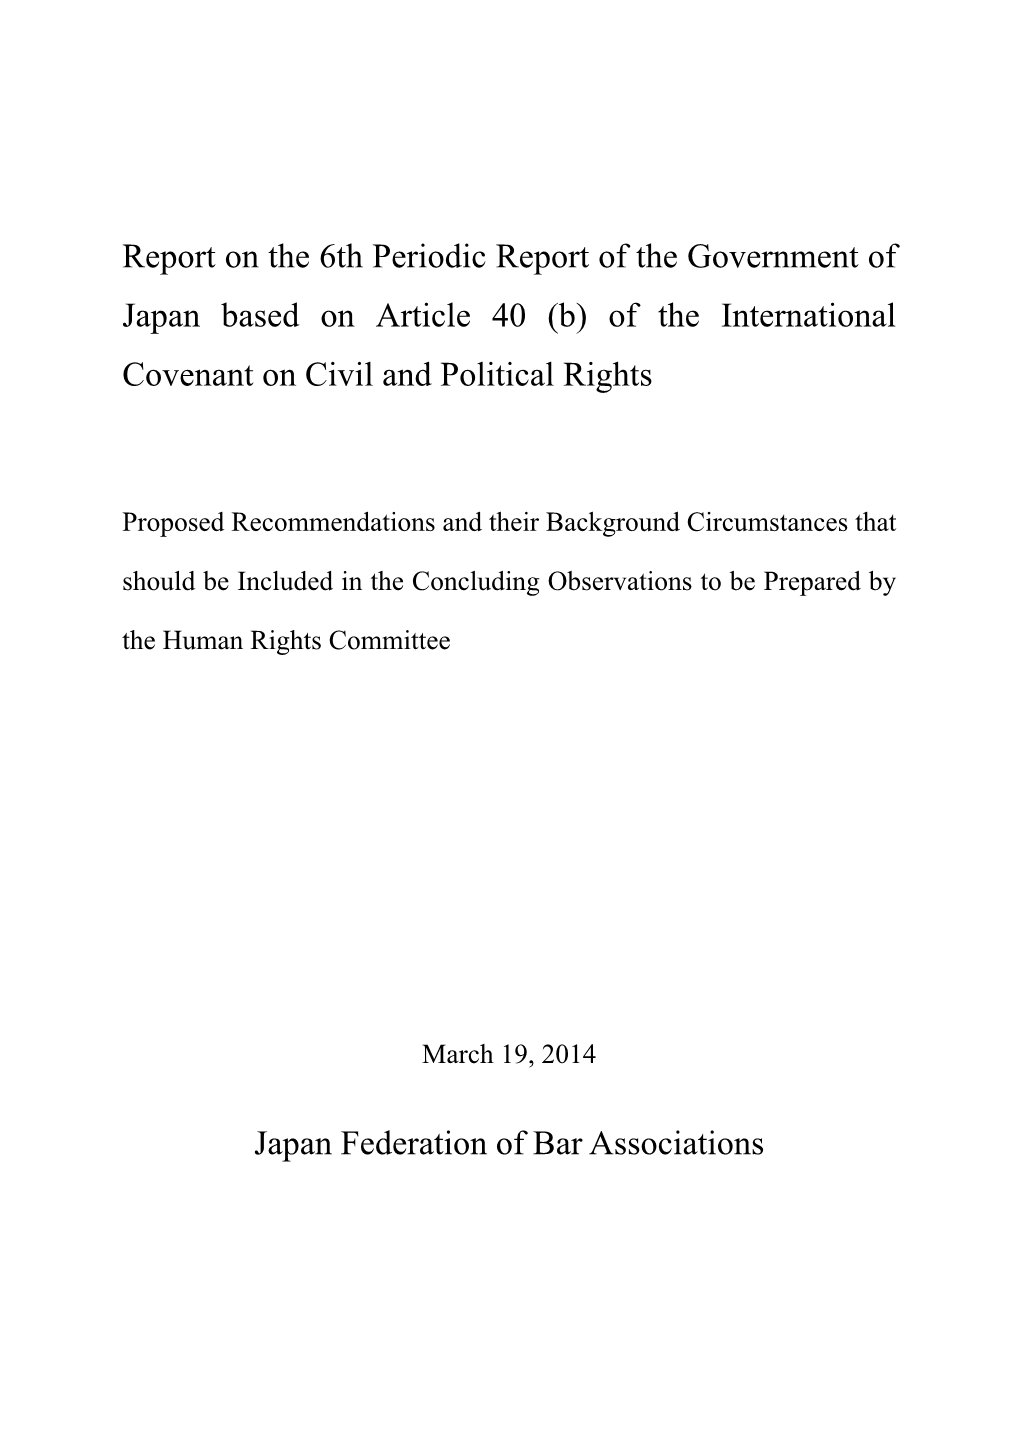 Report on the 6Th Periodic Report of the Government of Japan Based on Article 40 (B) of the International Covenant on Civil and Political Rights